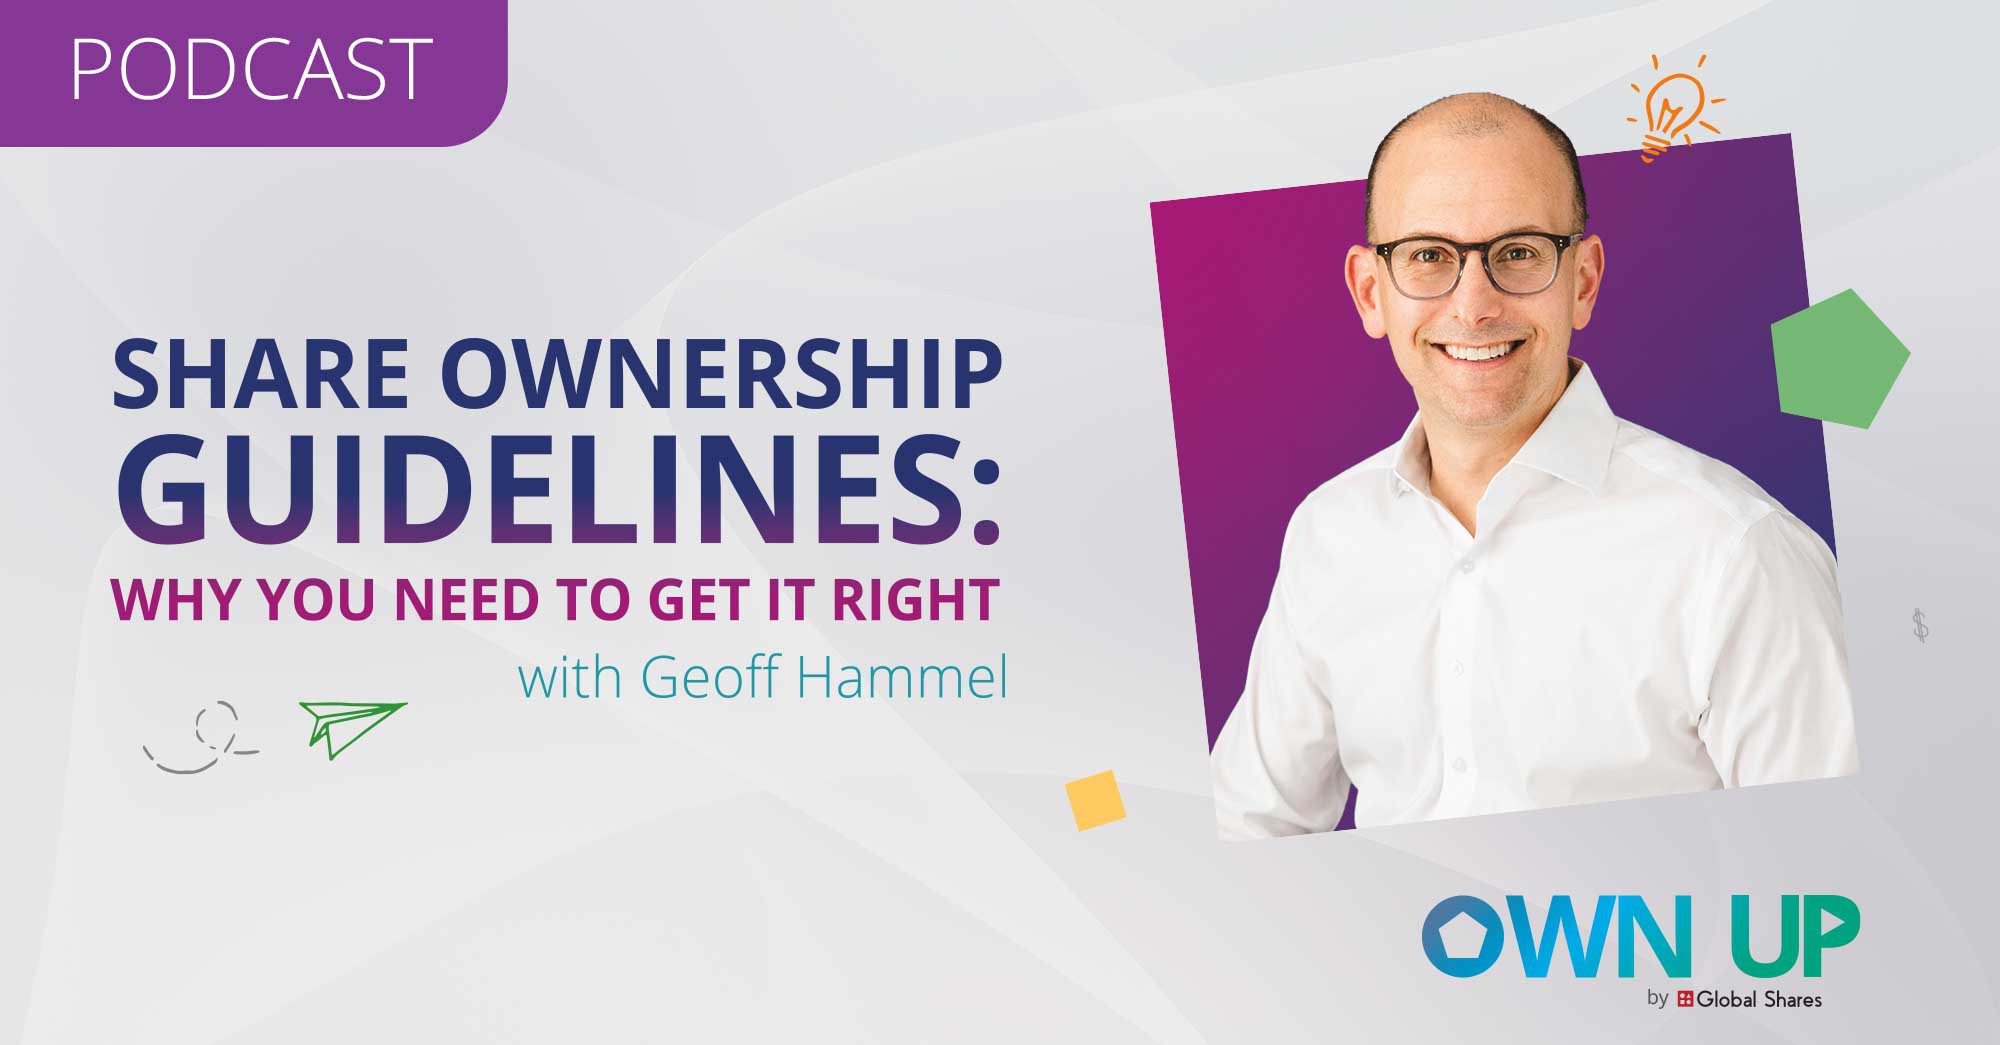 Own Up Podcast: Share Ownership Guidelines – Why You Need to Get It Right with Geoff Hammel